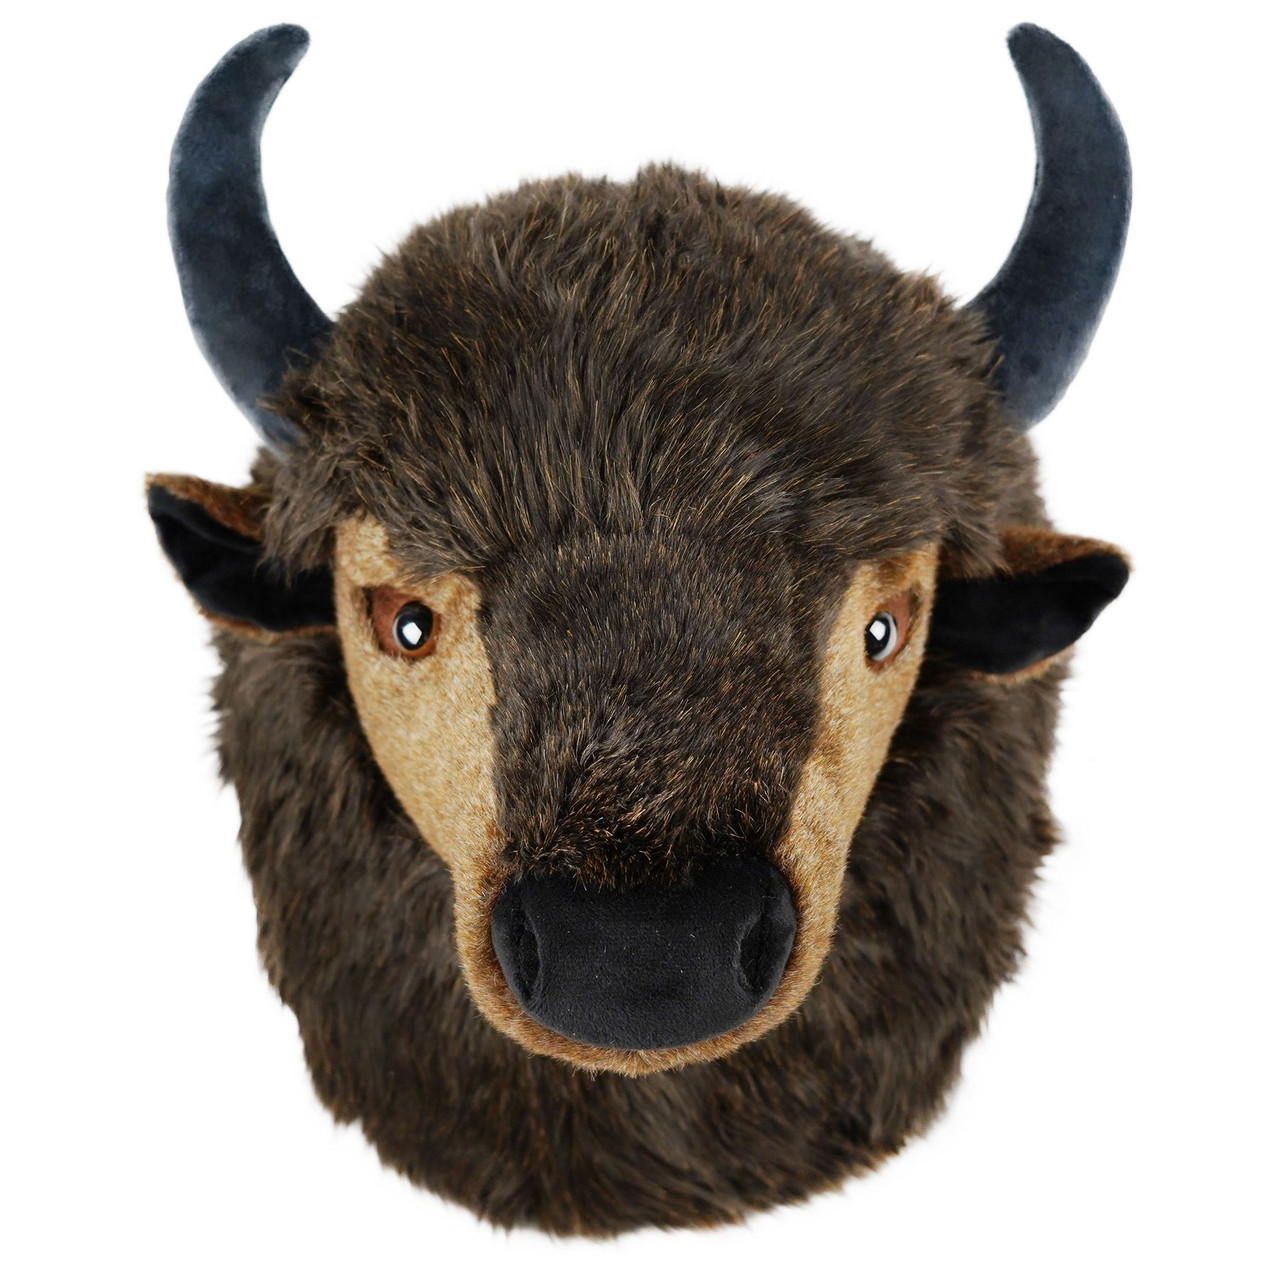 Brillo The Bison | 15 inch Stuffed Animal Plush Buffalo Head Wall Mount Bust | by Tiger Tale Toys